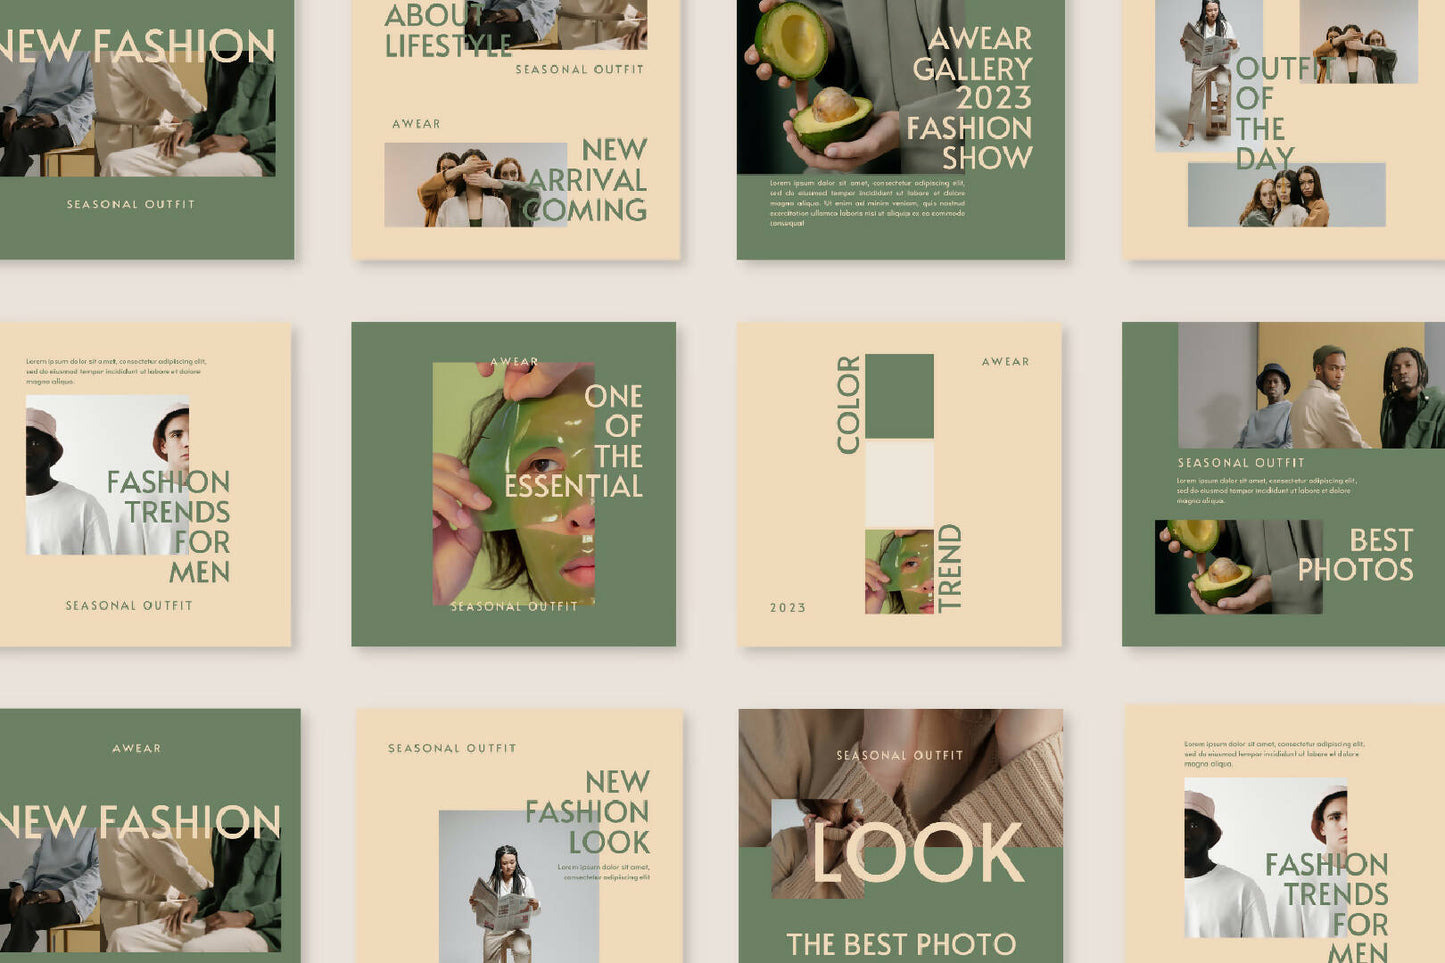 Fashion Template for Instagram - Editable with Canva